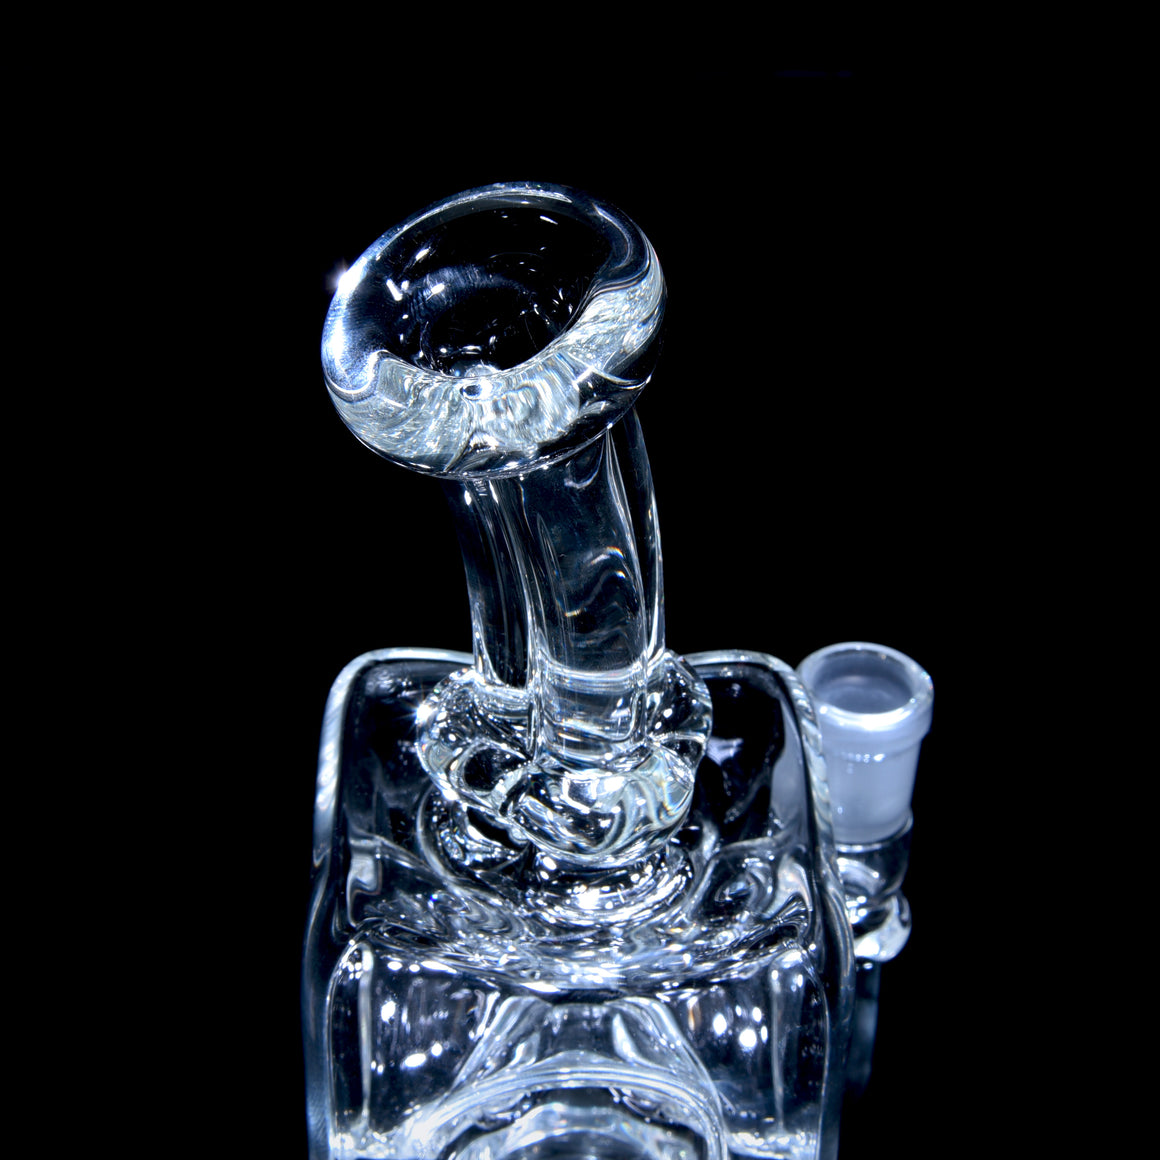 Swiss Cube Rig w/ Textured Clover Neck - Clear - 14mm Female